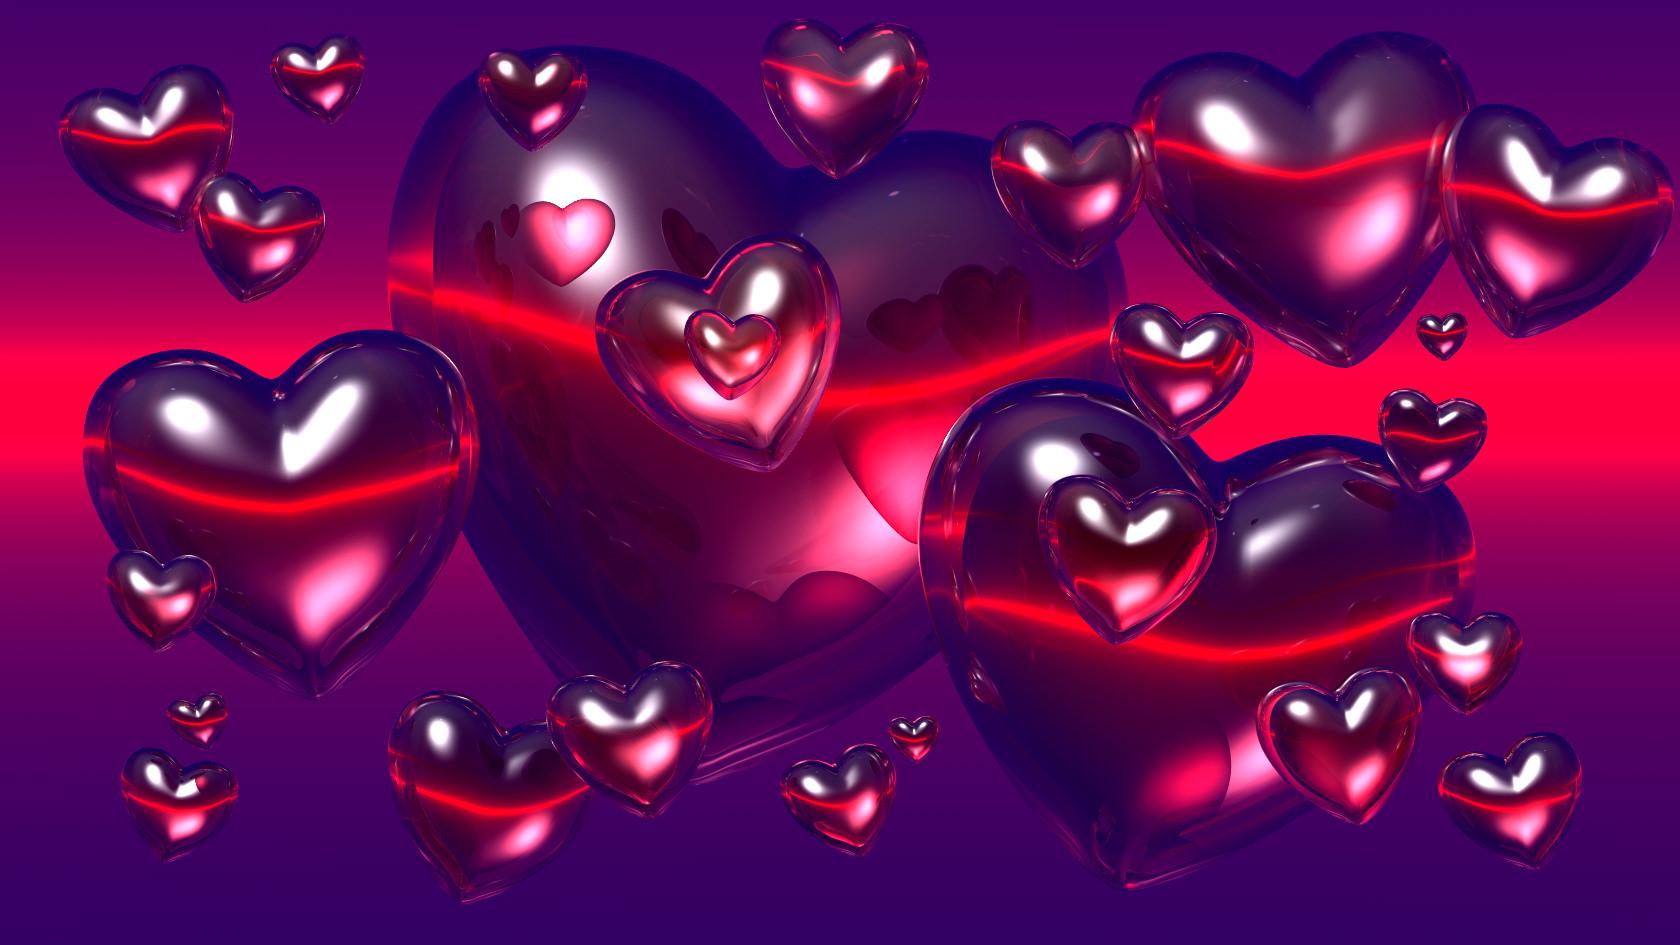 Two Heart Love Pink And Purple HD Wallpaper. High Definitions